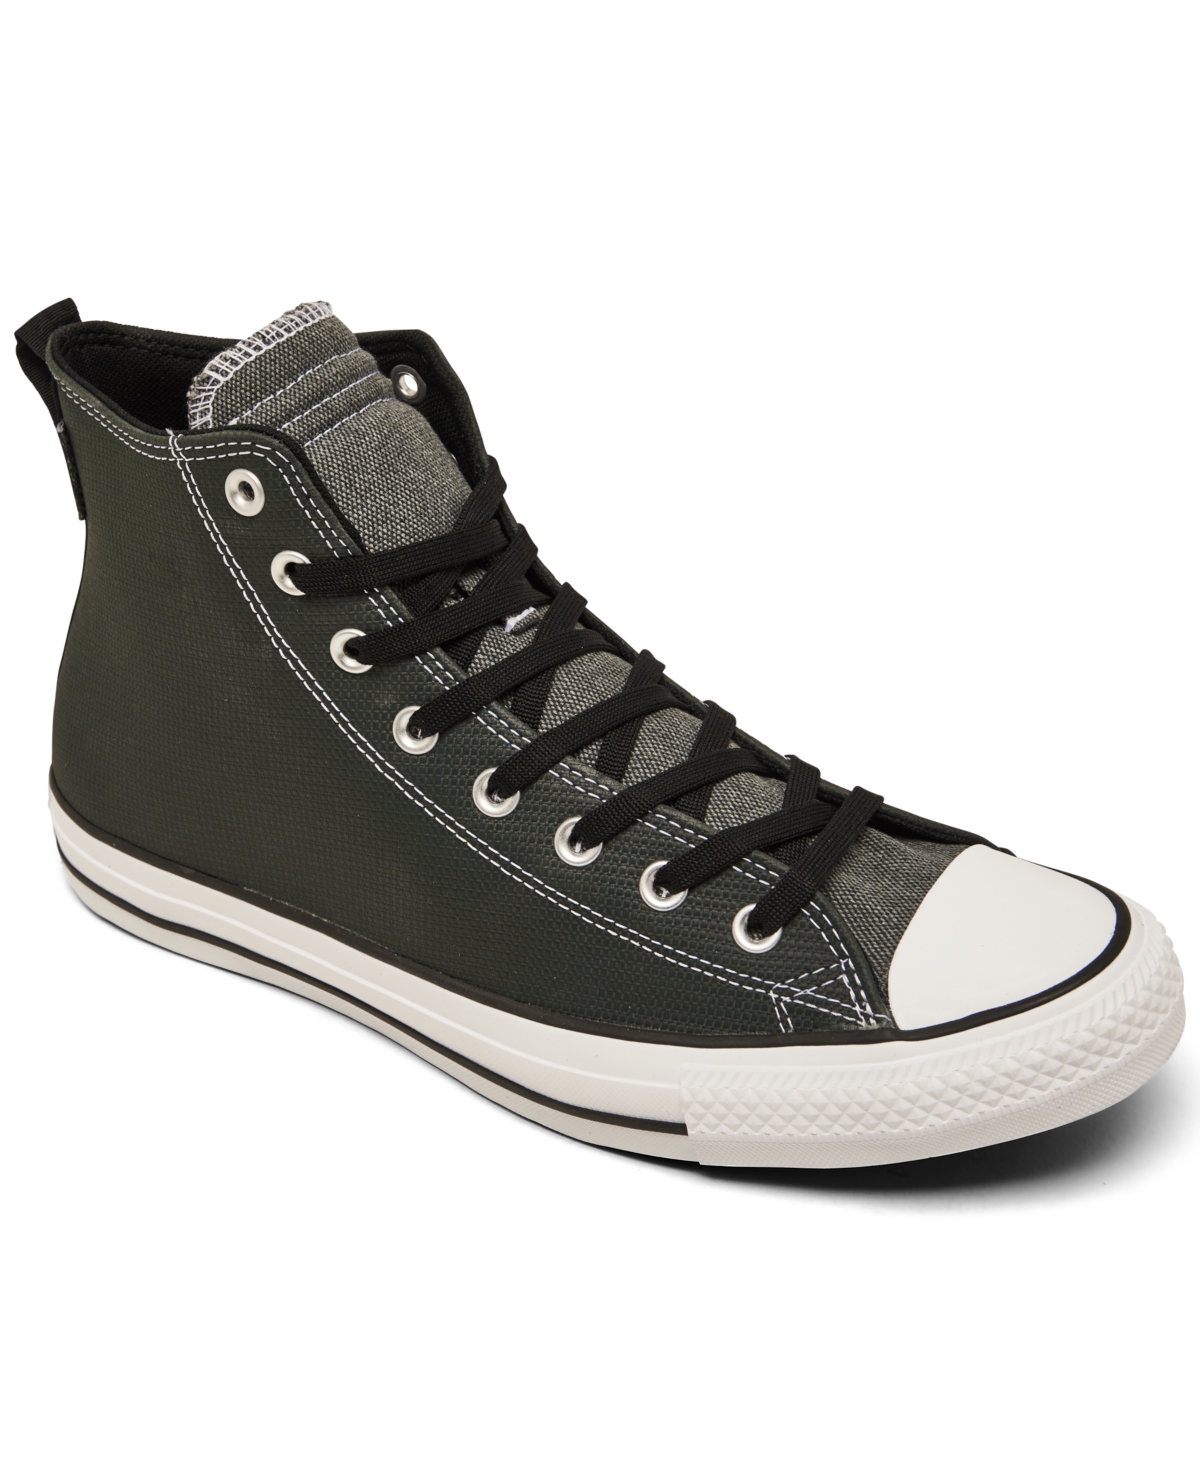 Men's Chuck Taylor All Star Leather High Top Casual Sneakers from Finish Line - Secret Pines, Black